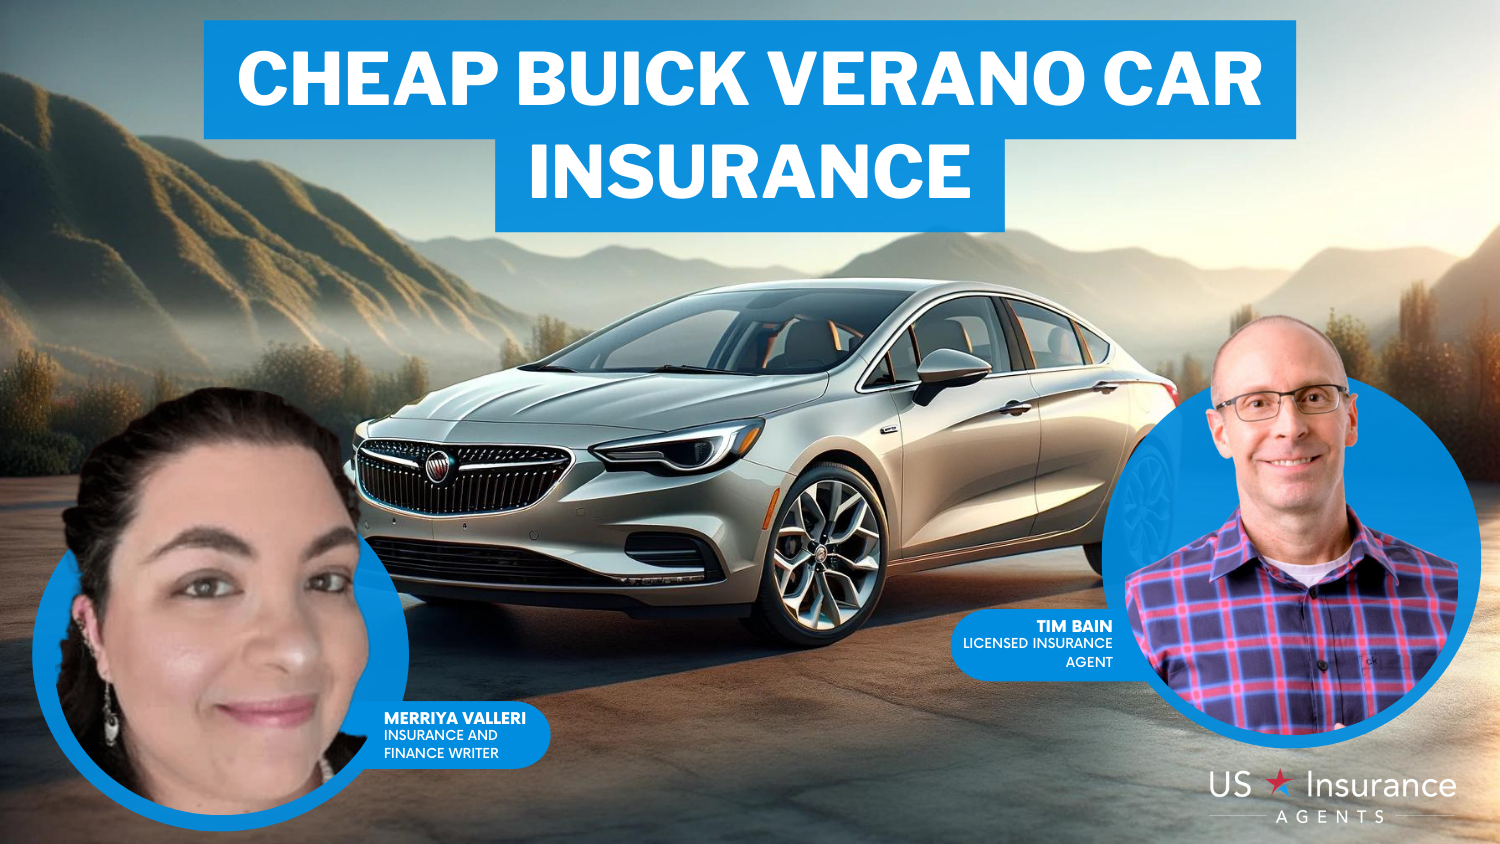 Cheap Buick Verano Car Insurance: Erie, State Farm, and Travelers